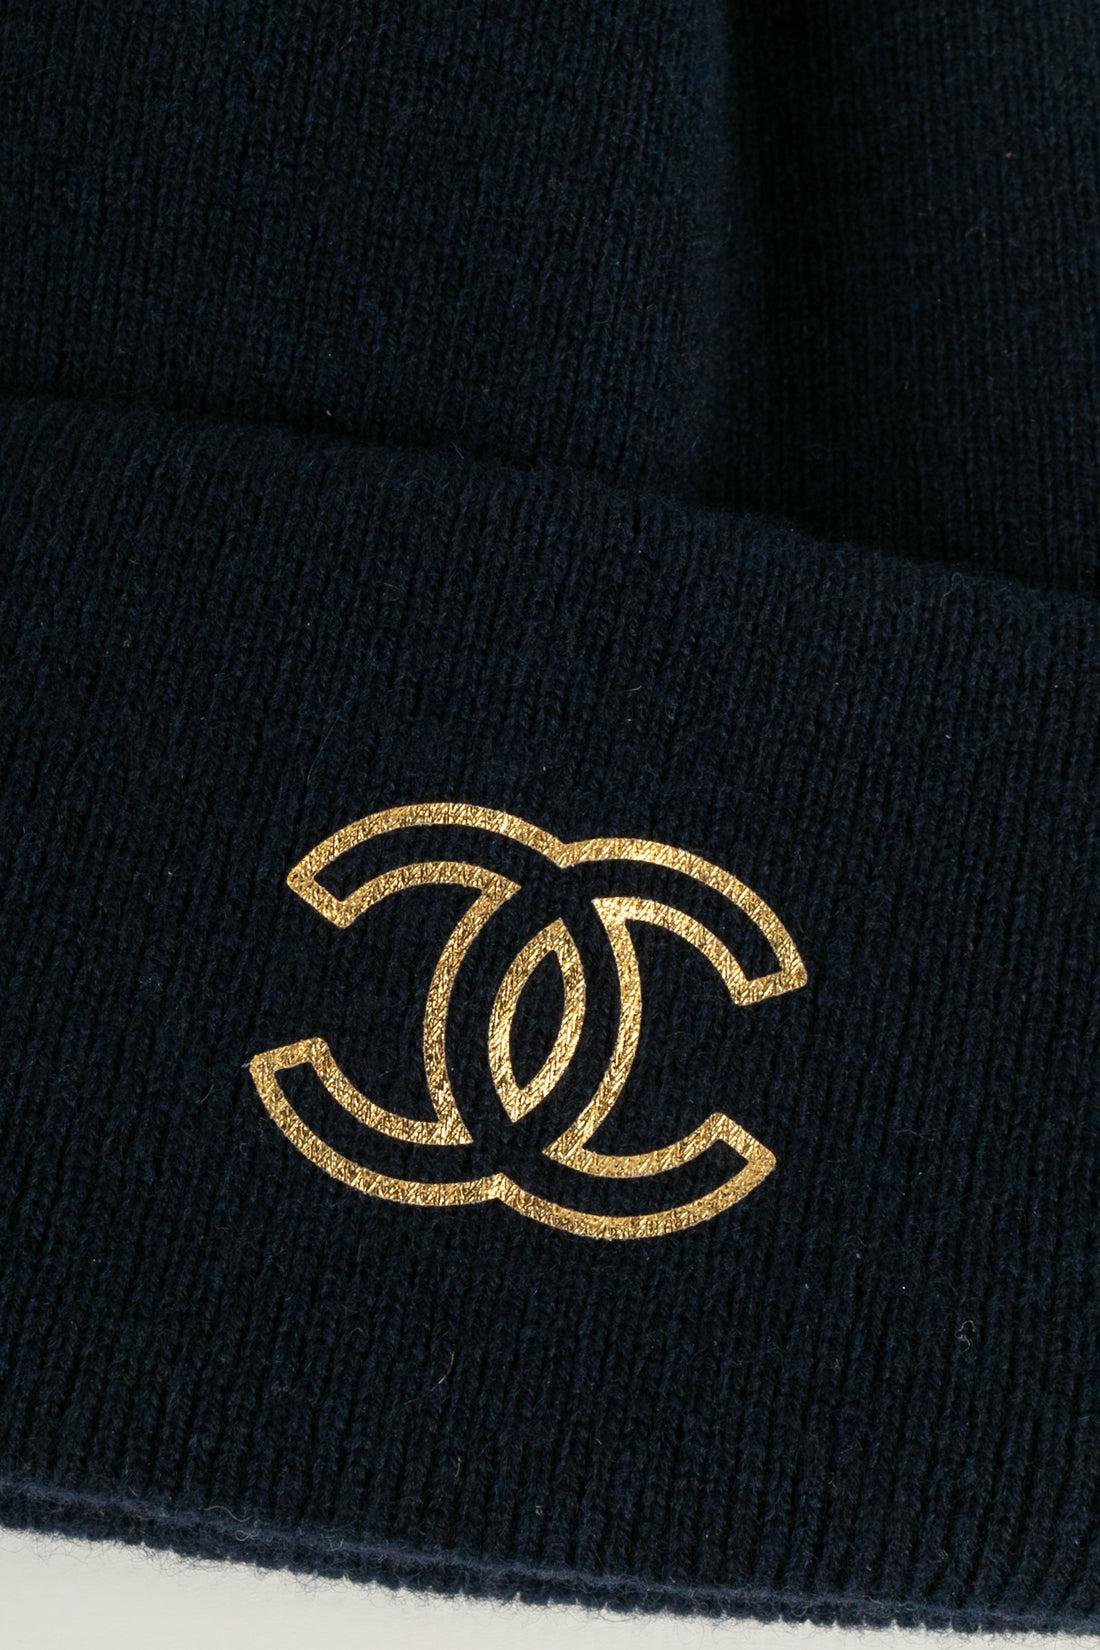 Chanel Cashmere Scarf, Pair of Gloves and Blue Hat Set 1